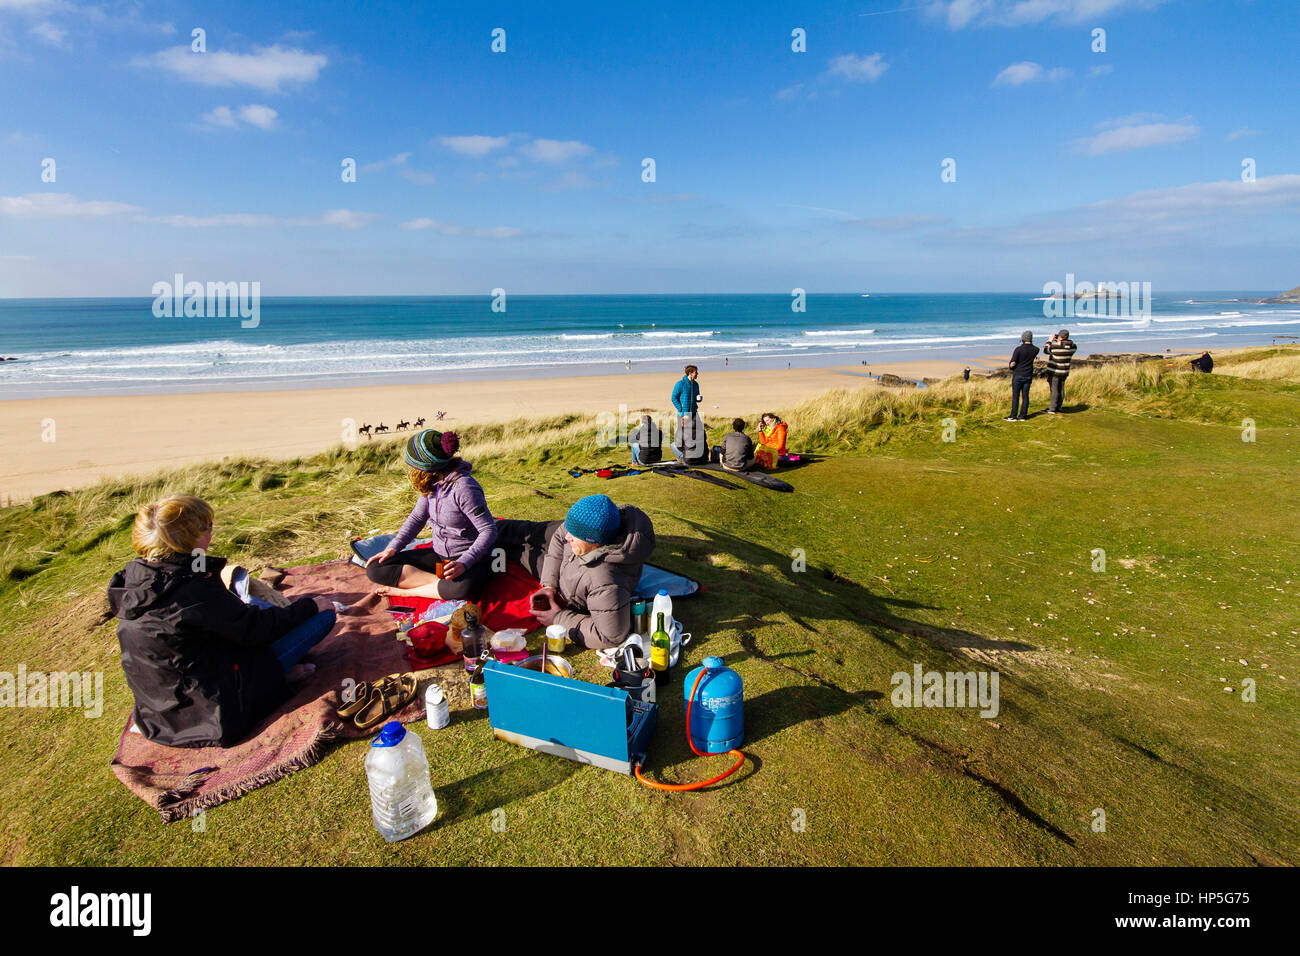 A family picnics on a cliff top in the sun after a surf in the briny. Stock Photo